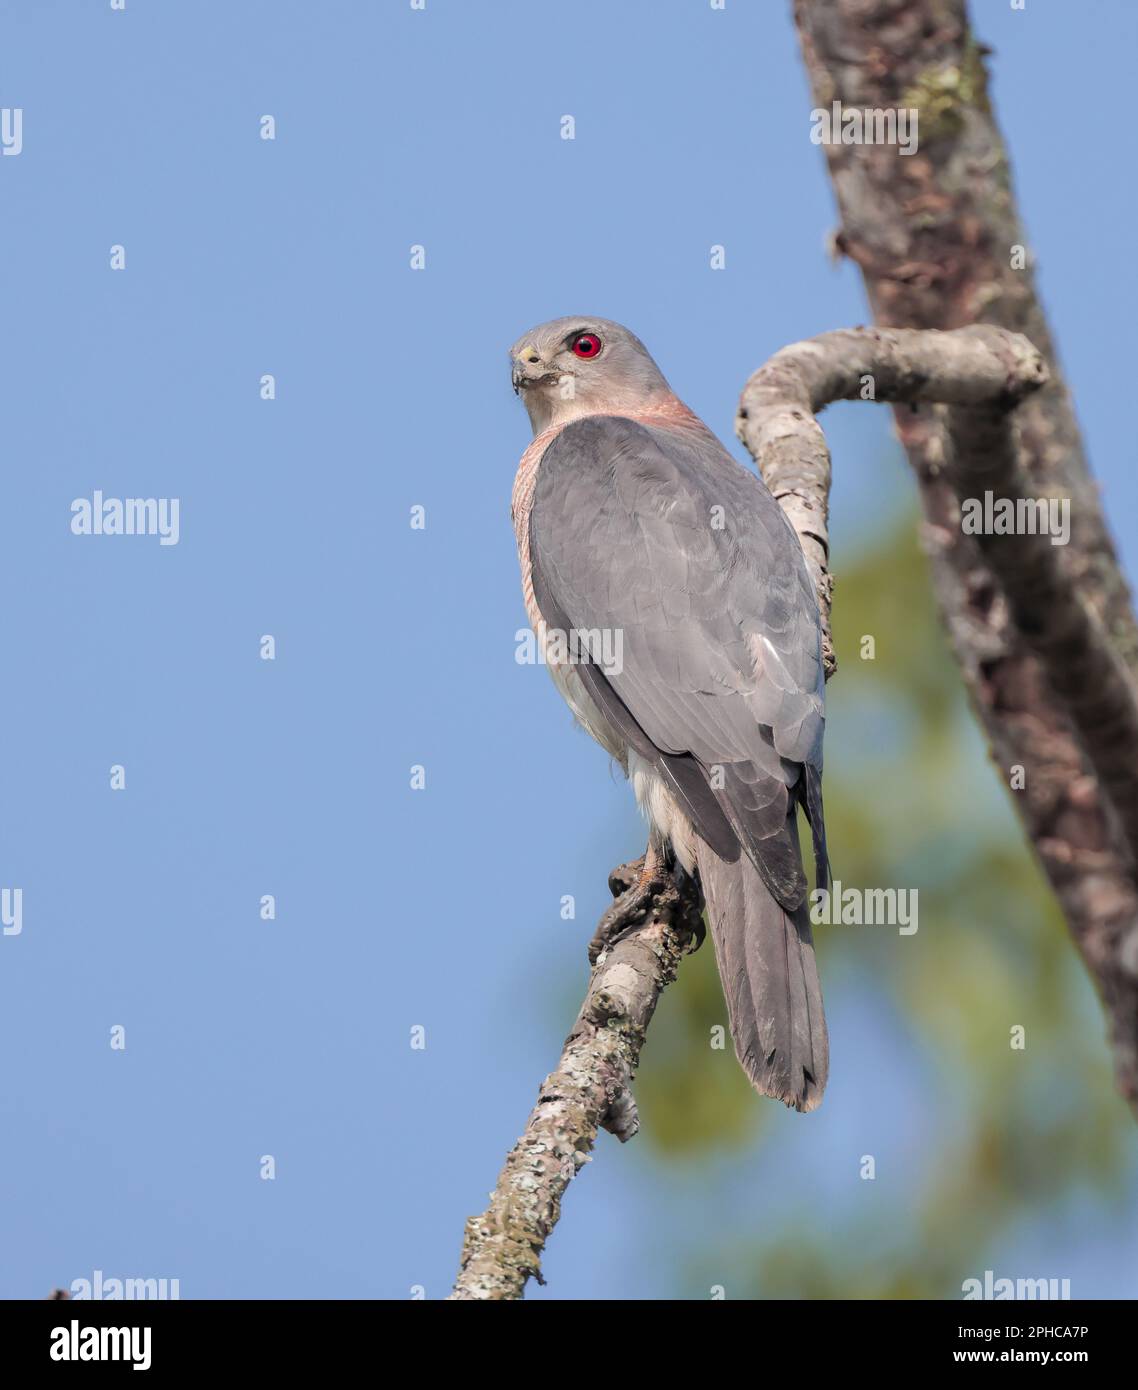 The shikra is a small bird of prey in the family Accipitridae found widely distributed in Asia and Africa. Stock Photo